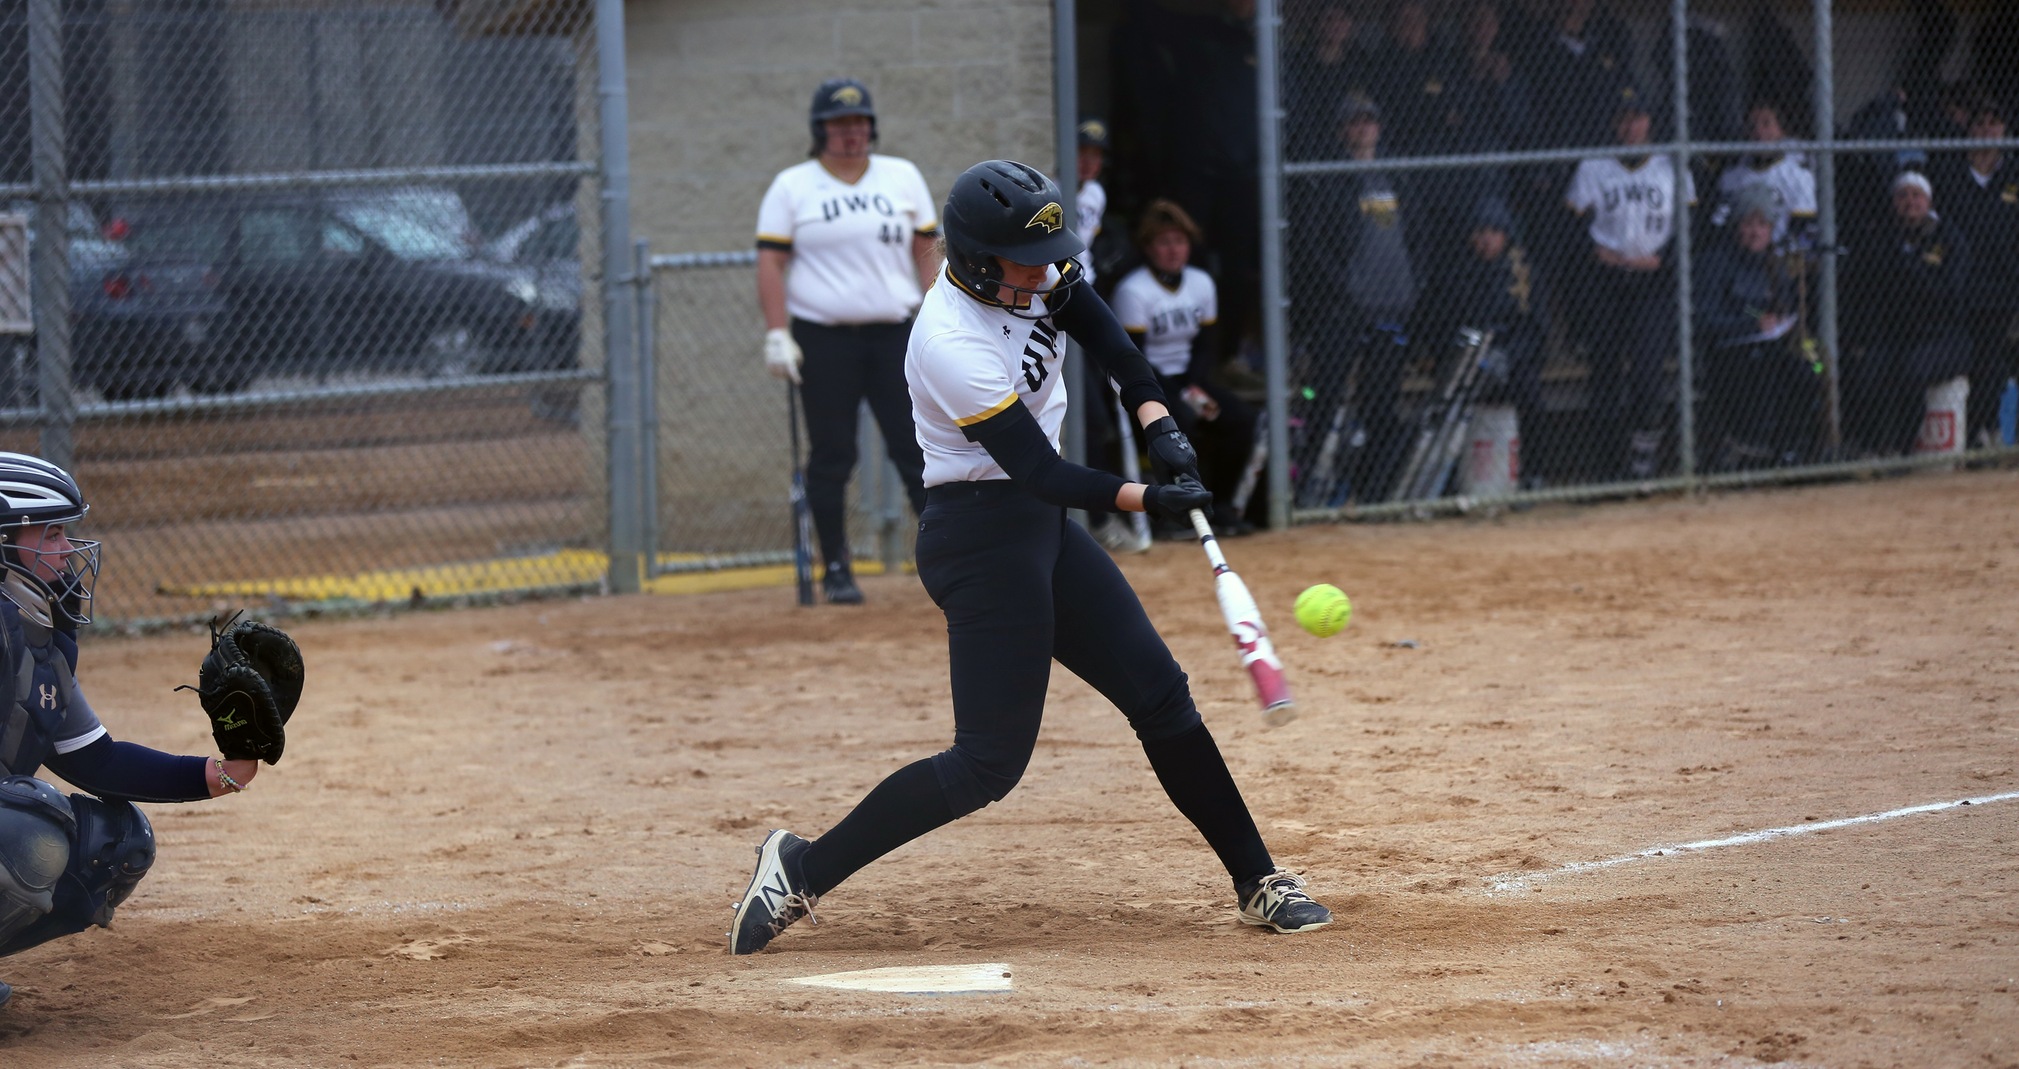 Abby Menting hit her 16th career home run during the Titans' doubleheader against the Blue Devils.